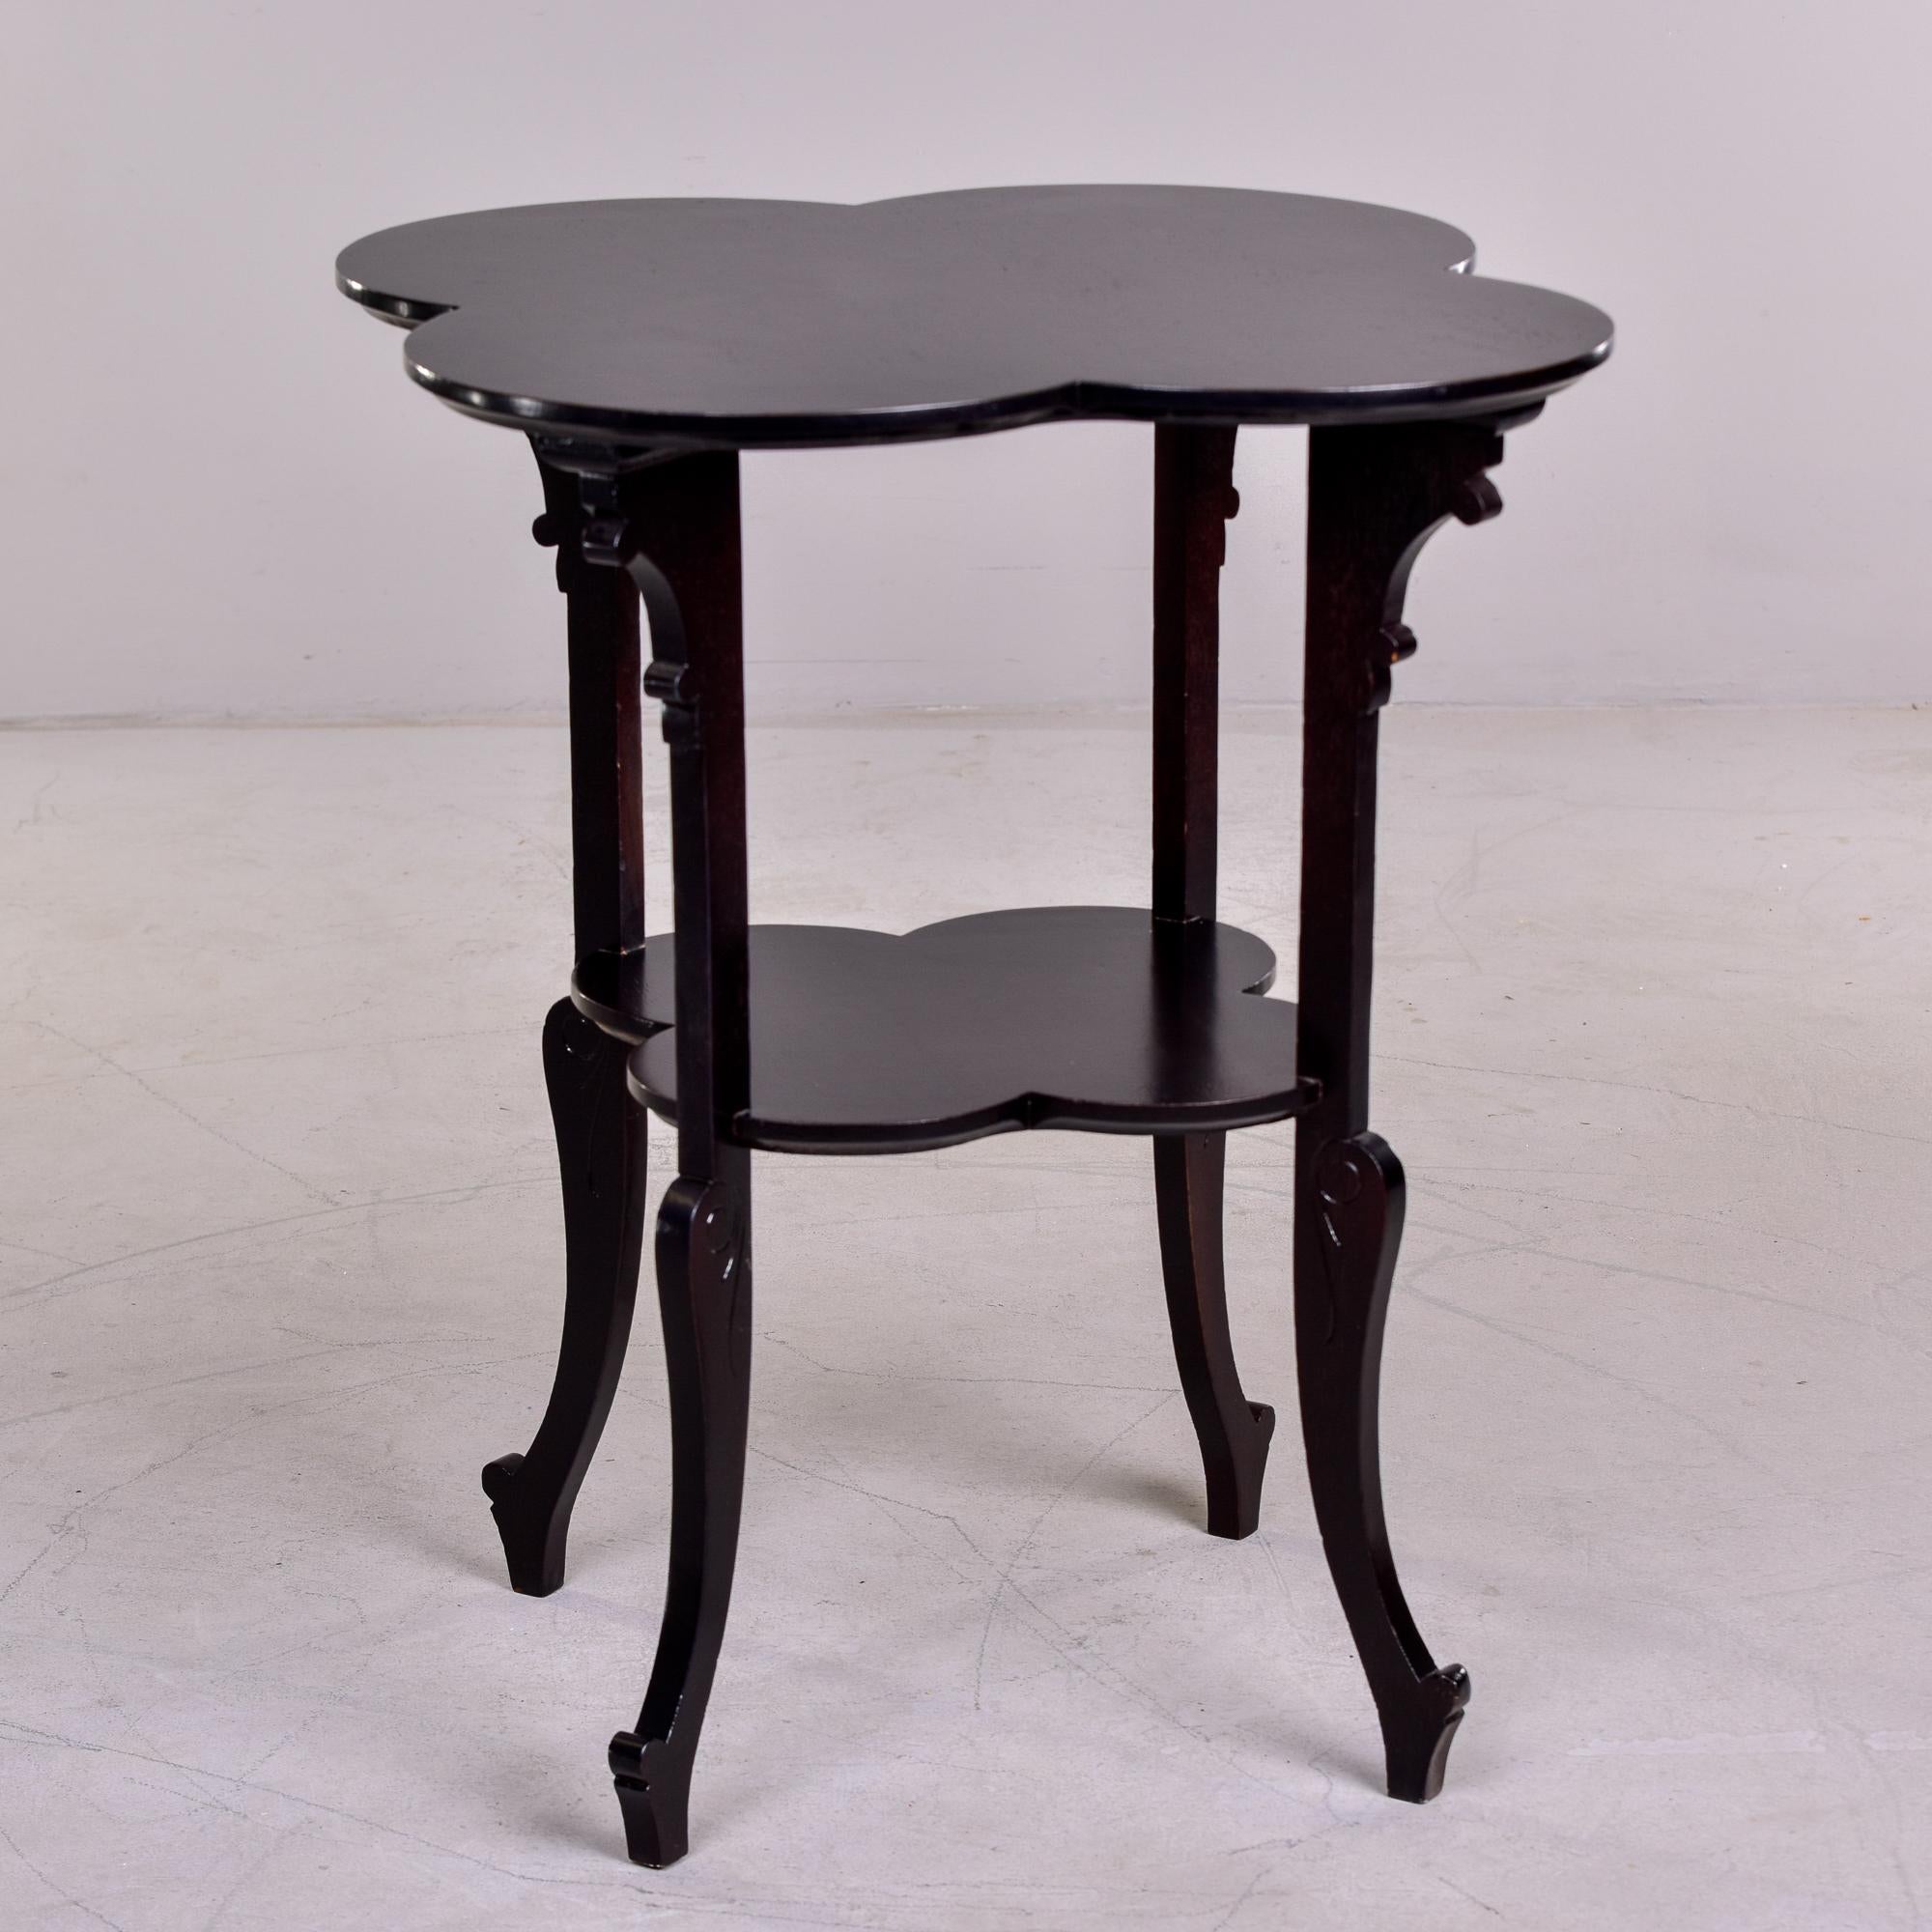 Circa 1930s French side table of black painted oak has a four leaf clover or quatrefoil shaped top and lower shelf and cabriole legs with carved details at the knees and top supports. Unknown maker.